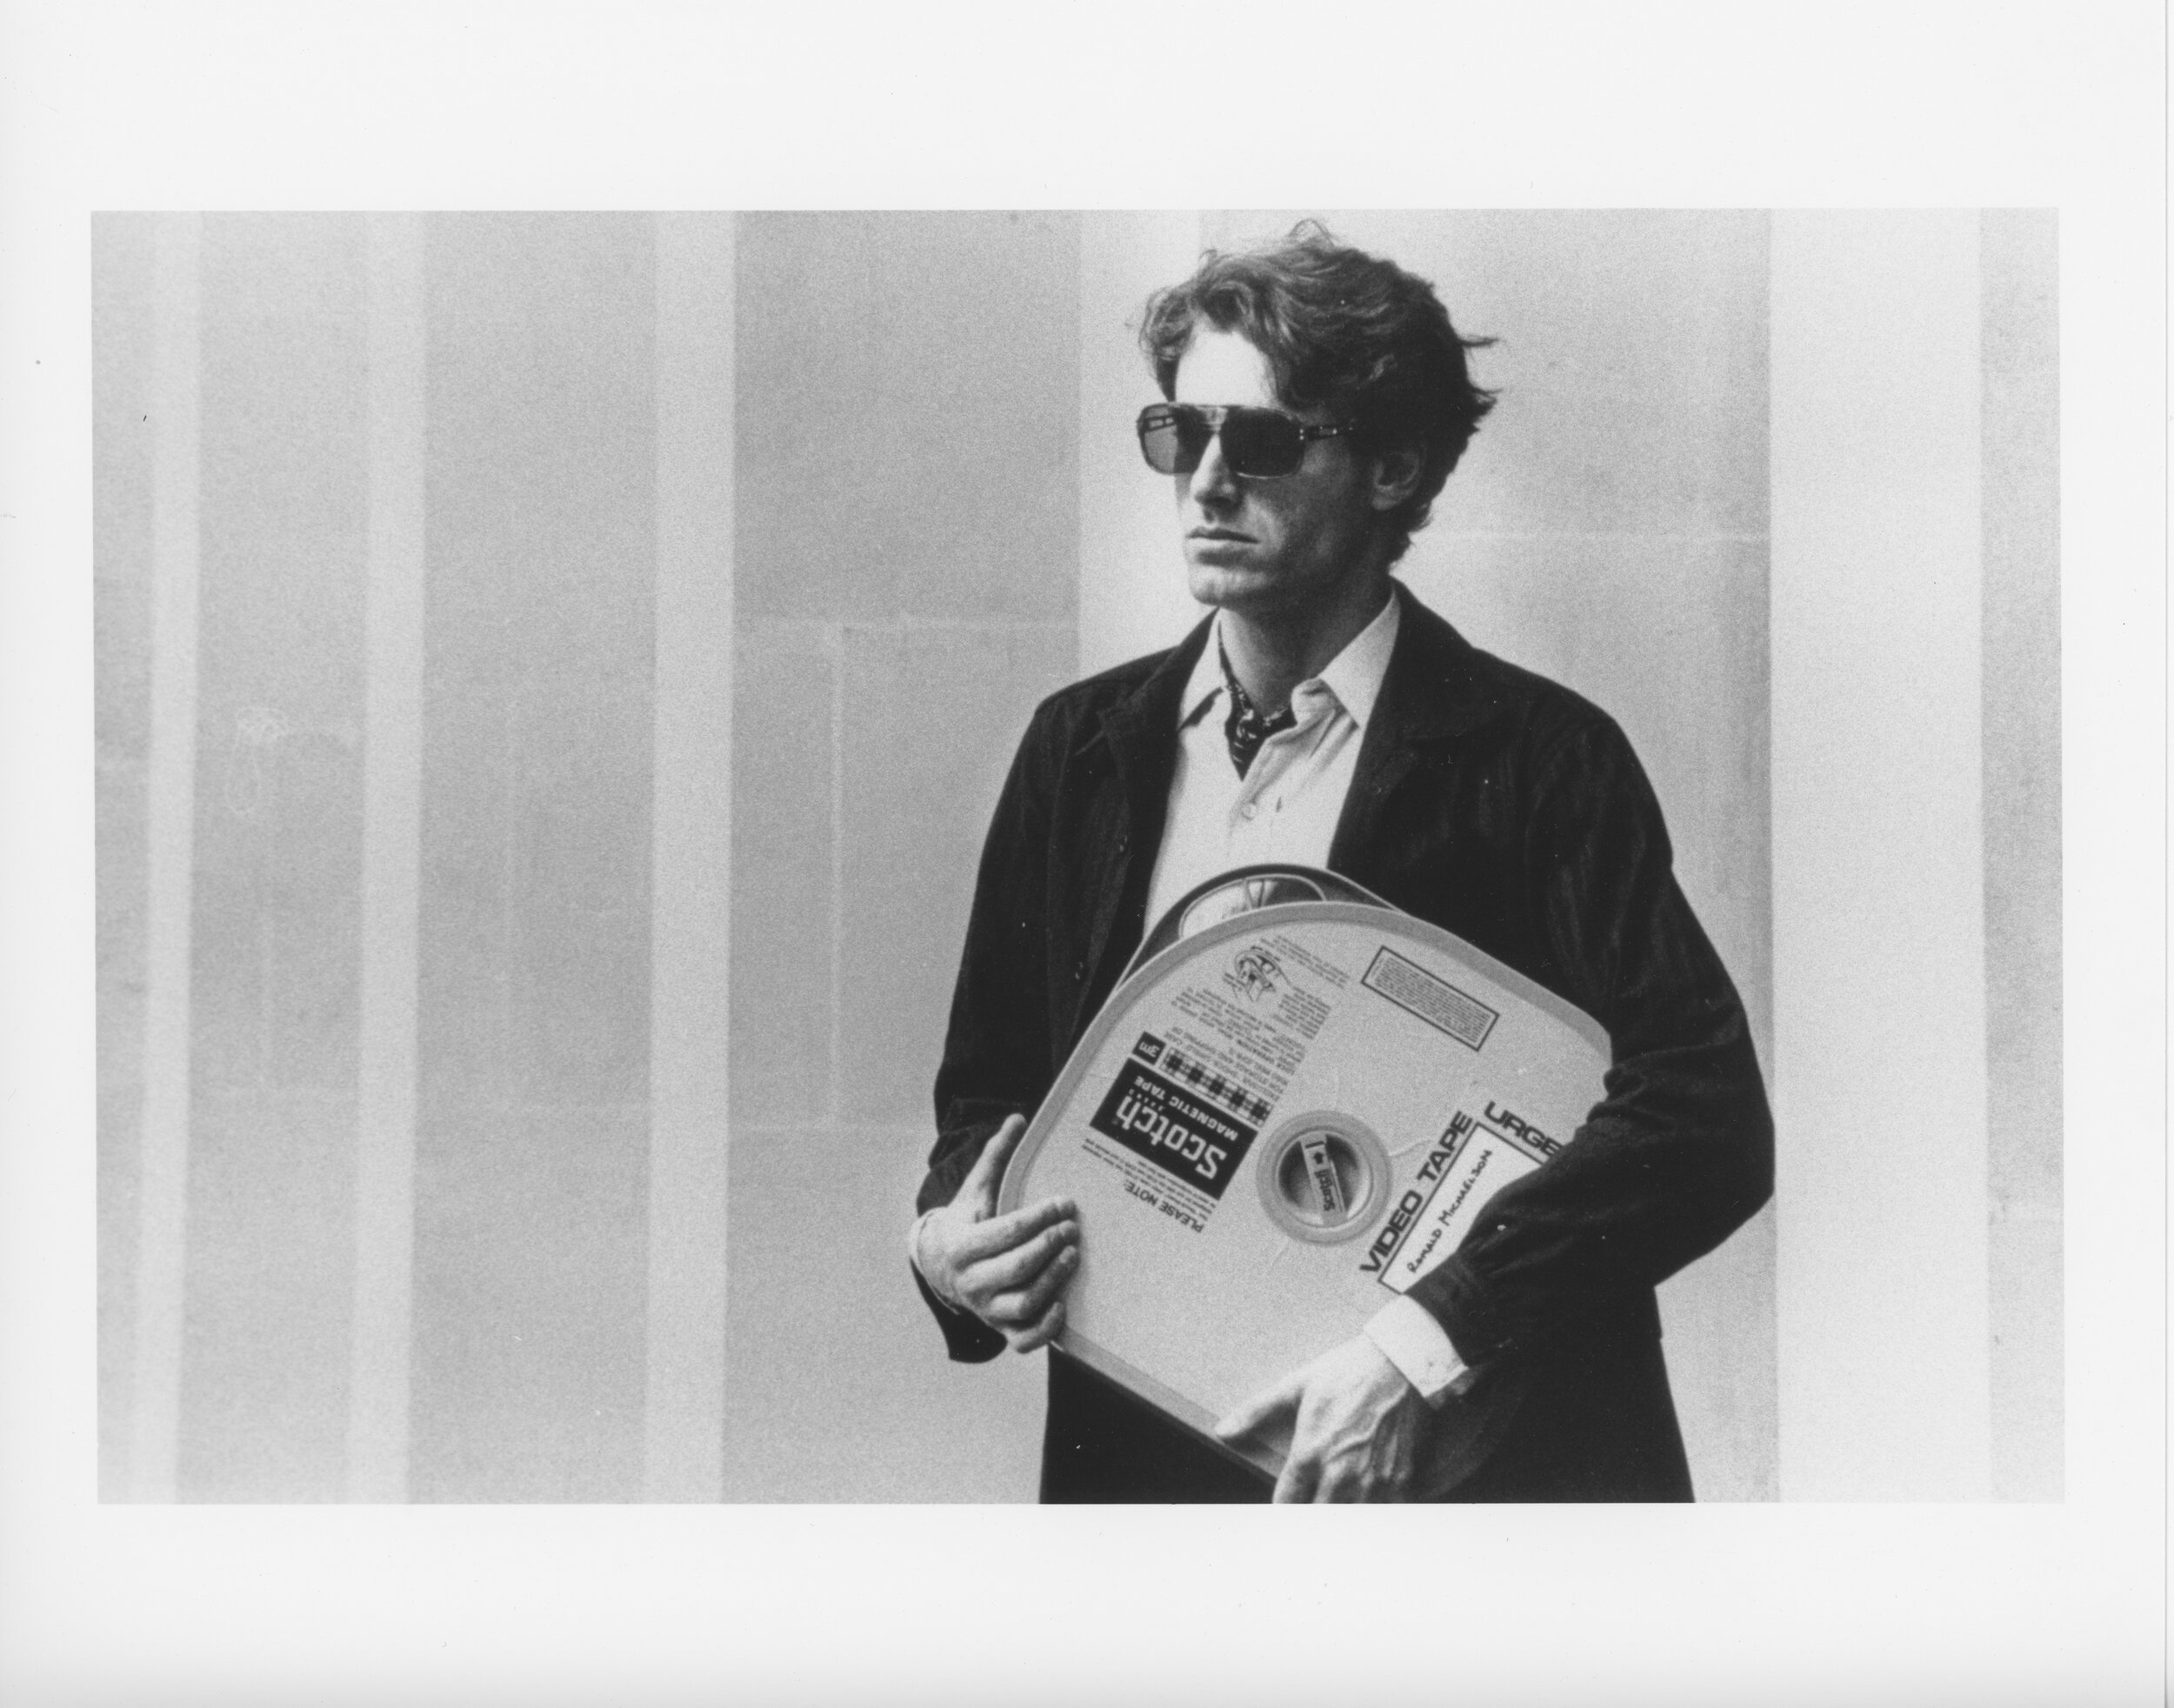   The Violent Tapes of 1975 , 1975. Series of 10 black-and-white photographs on paper, 9 x 12 inches (22.86 x 30.48 cm) each. 